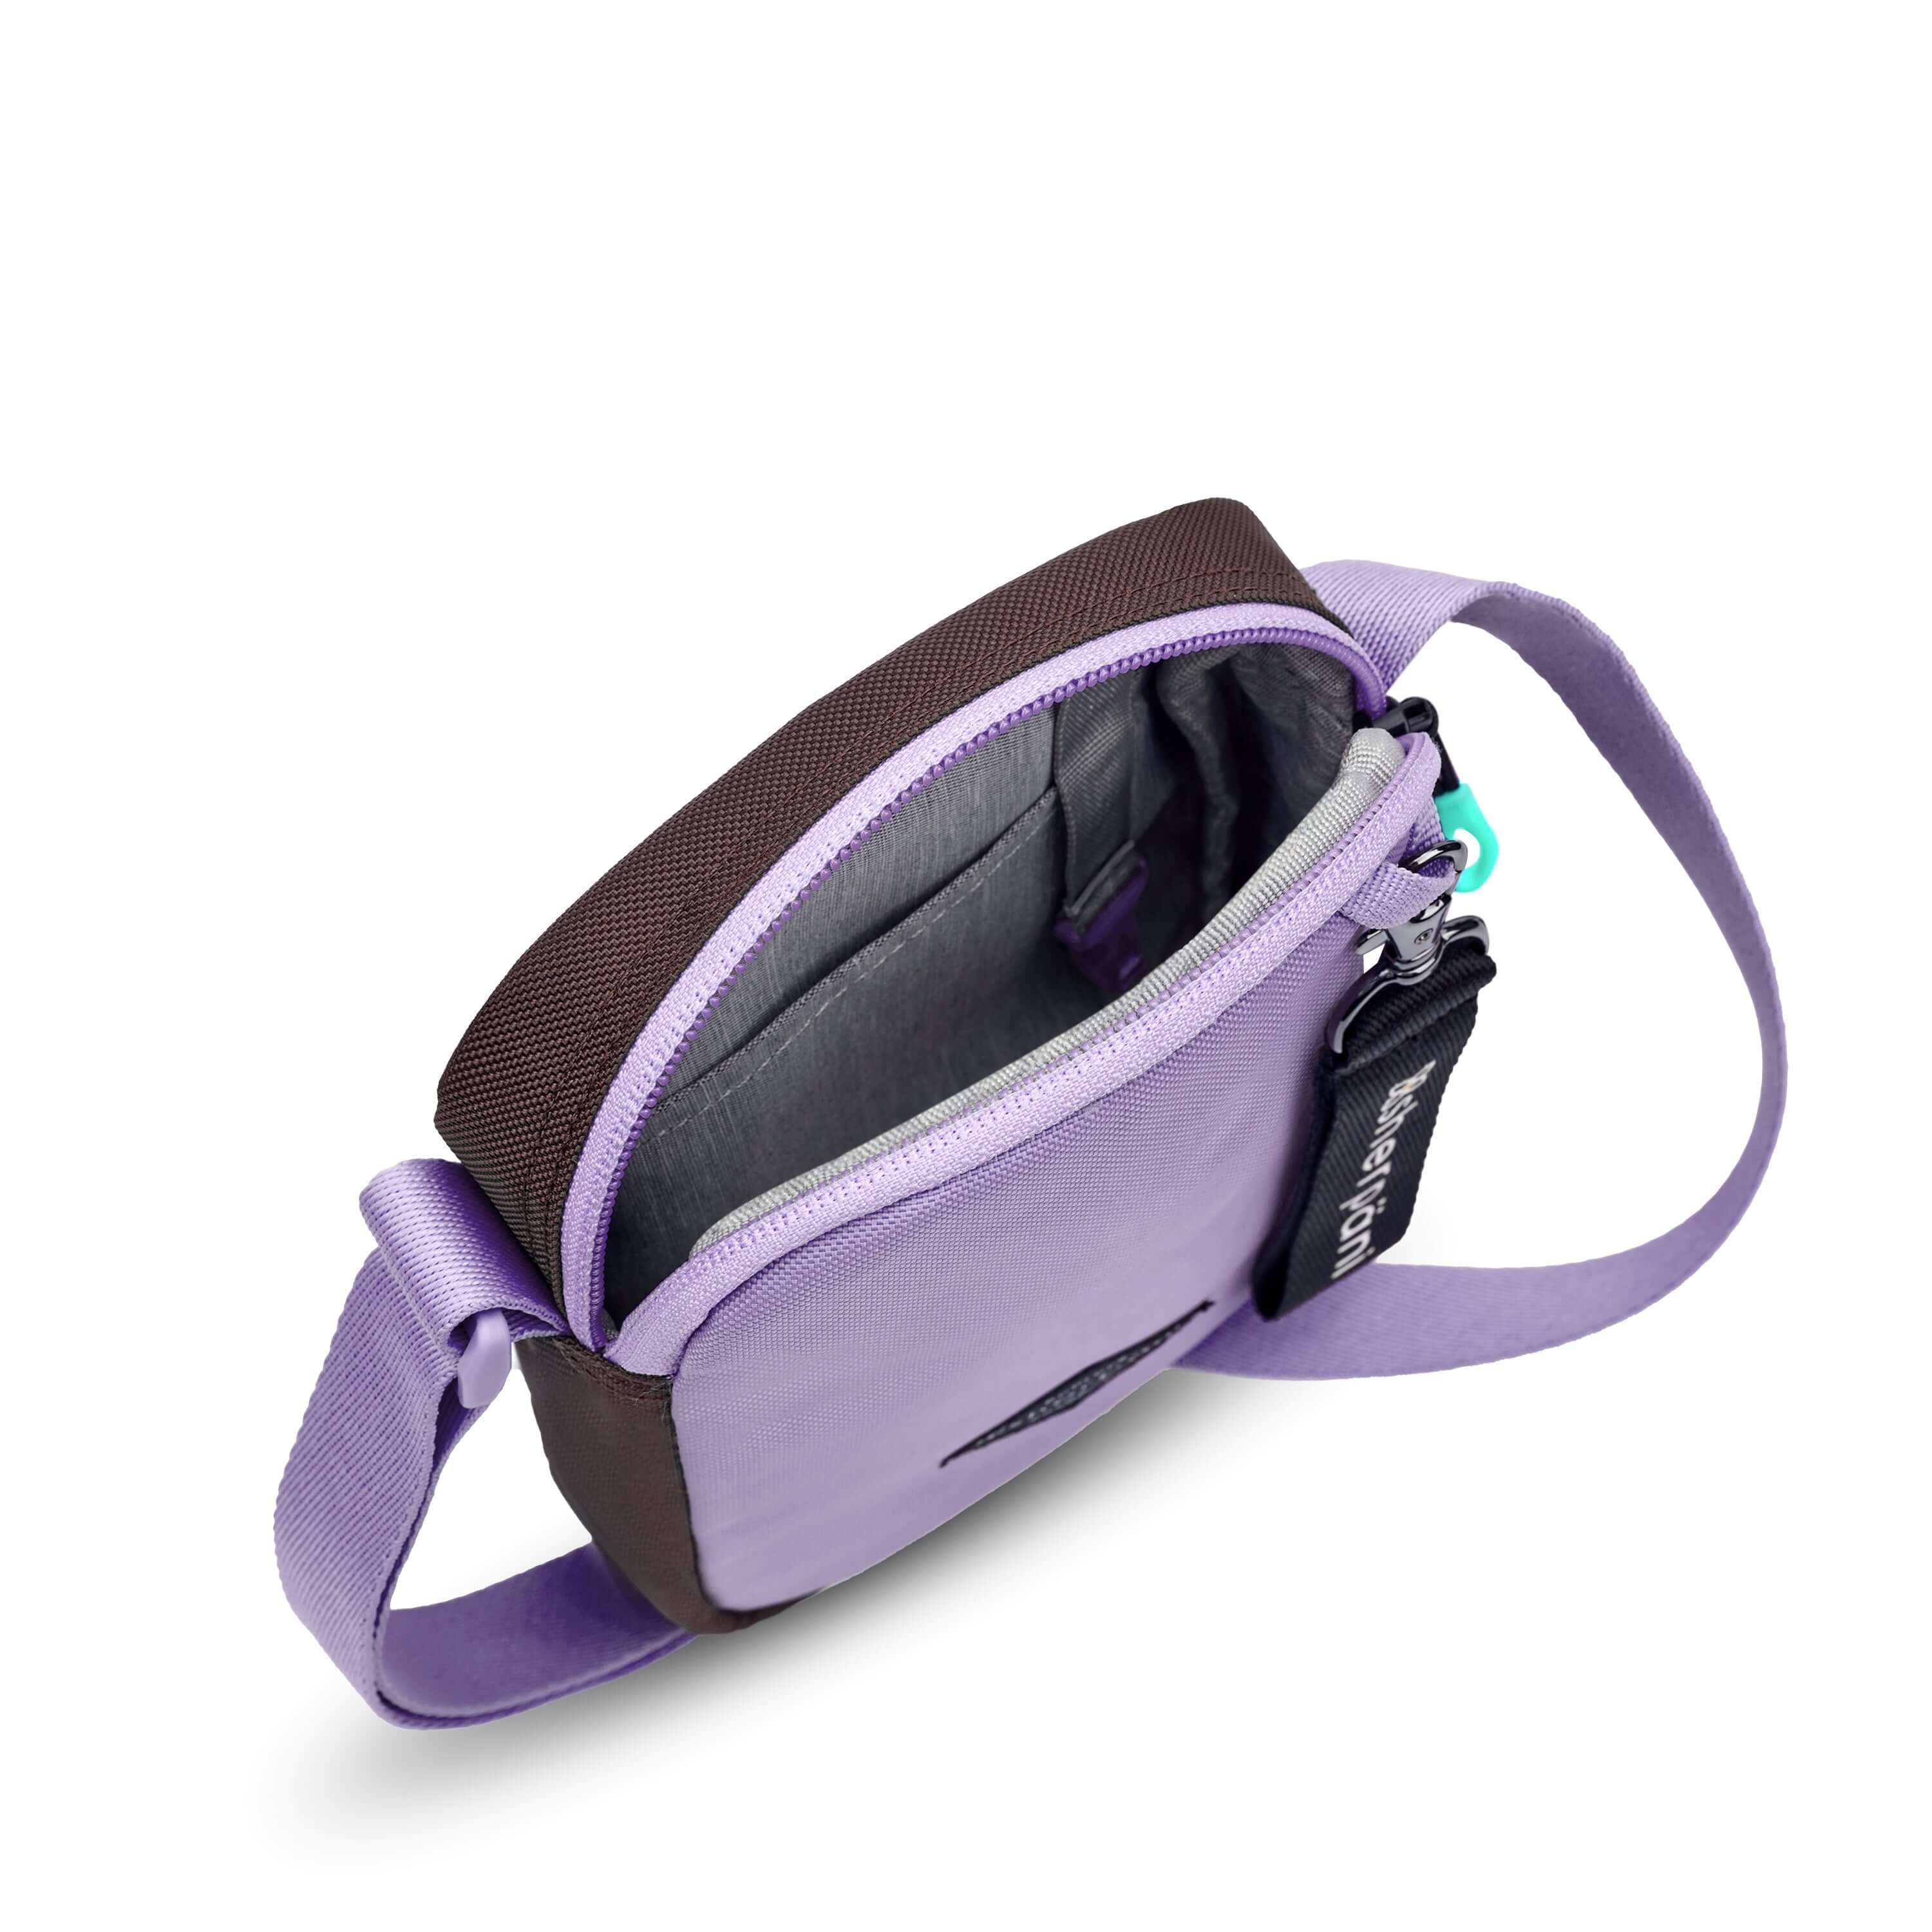 Top view of Sherpani crossbody, the Rogue in Lavender. The main zipper compartment is open to reveal a light gray interior, internal pouch and key fob.